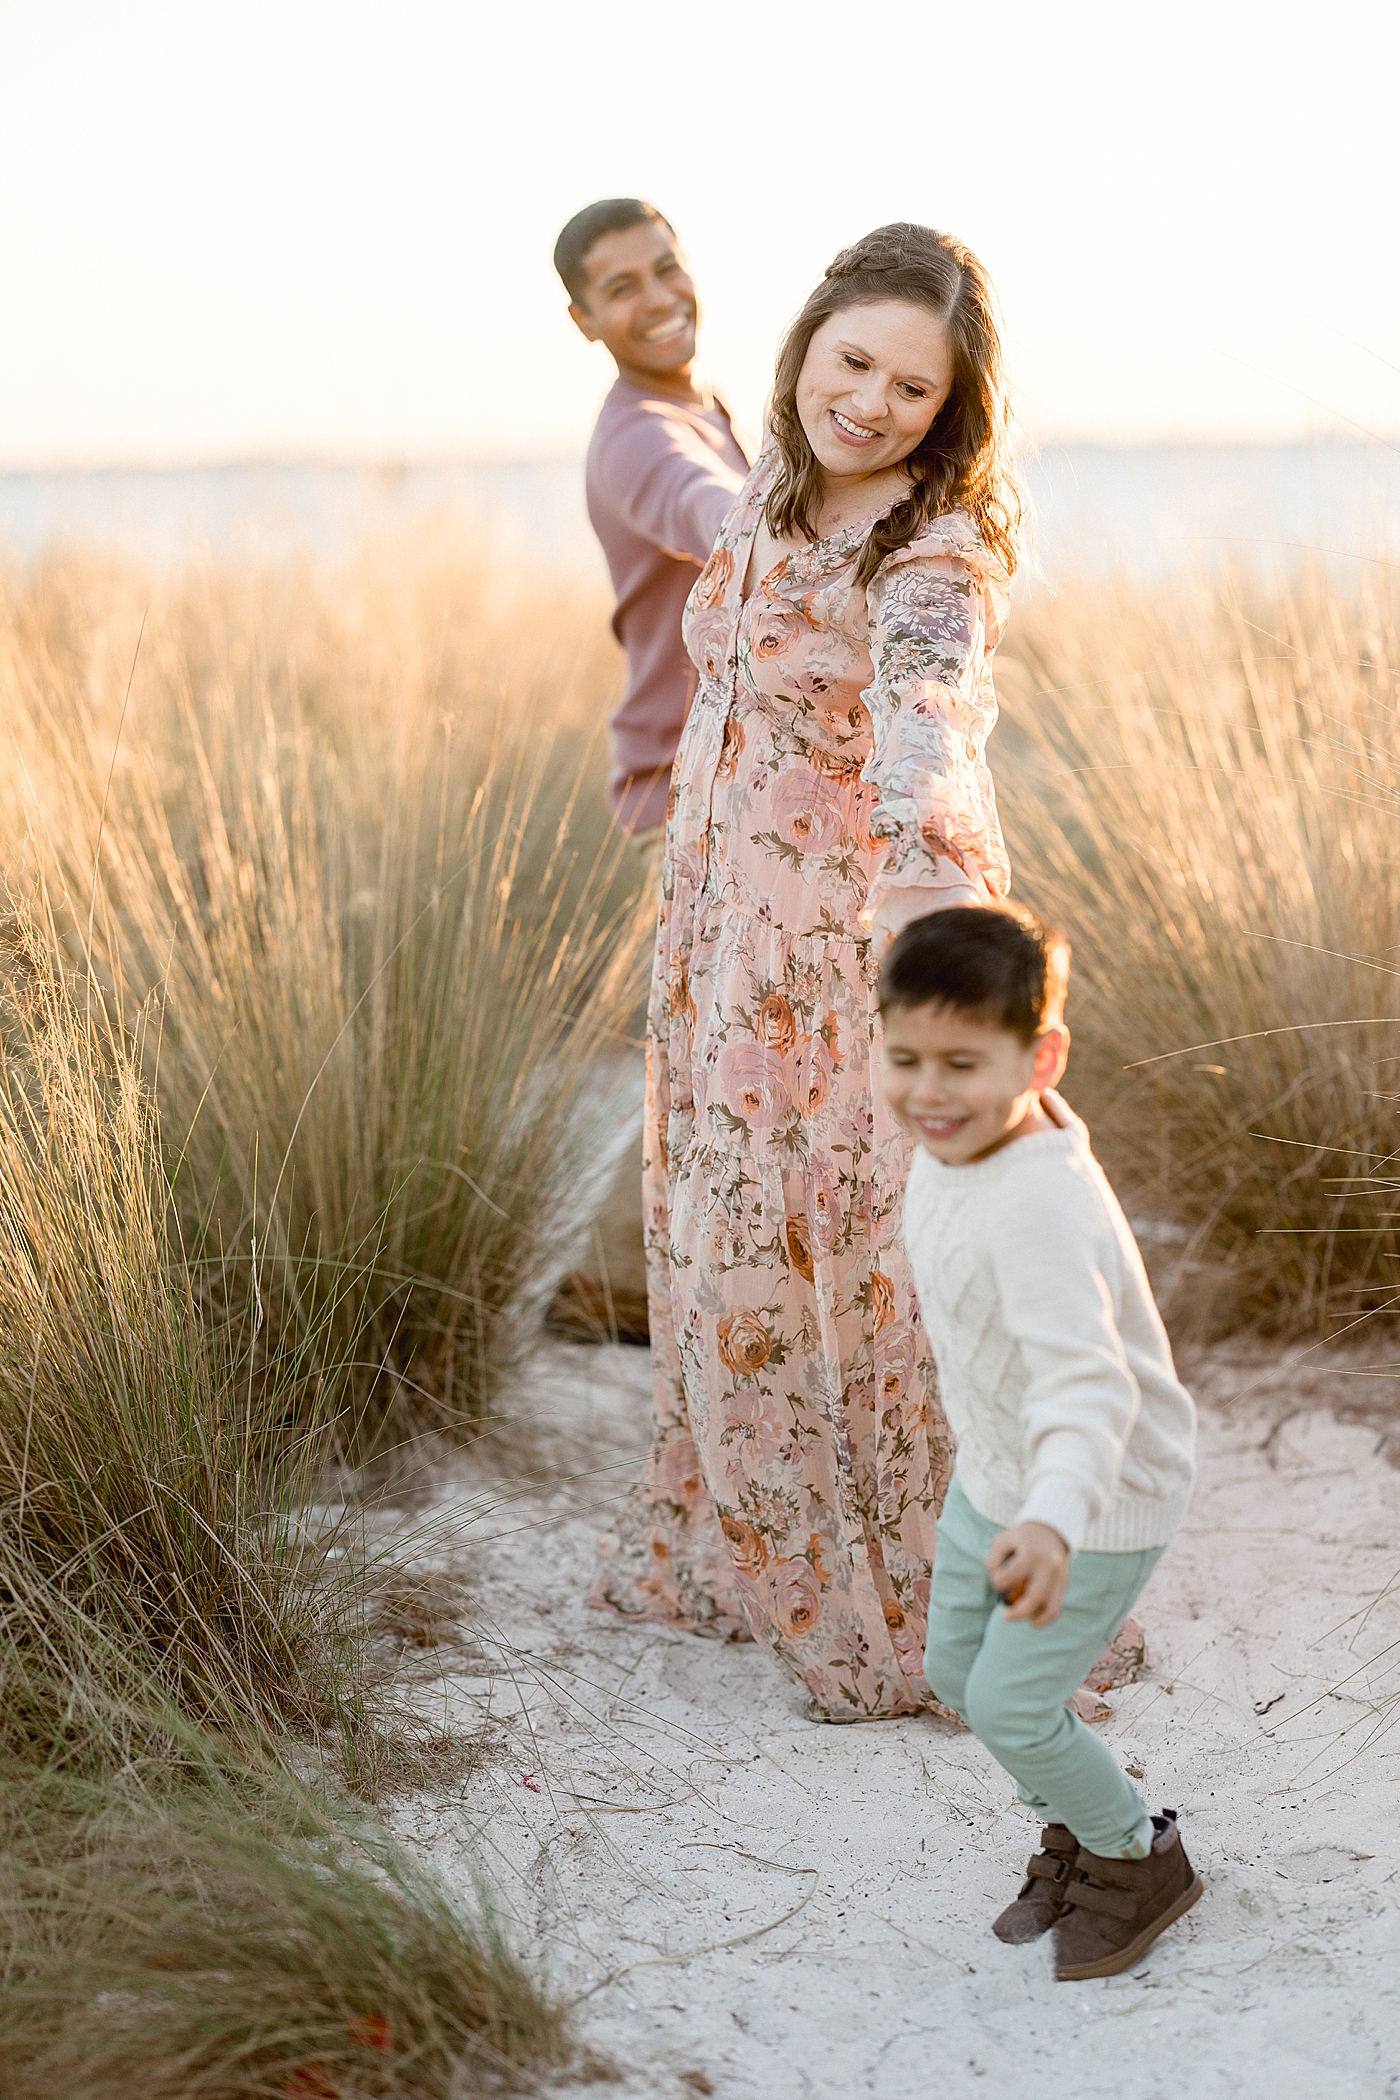 Annual family portraits with Brittany Elise Photography in Tampa.